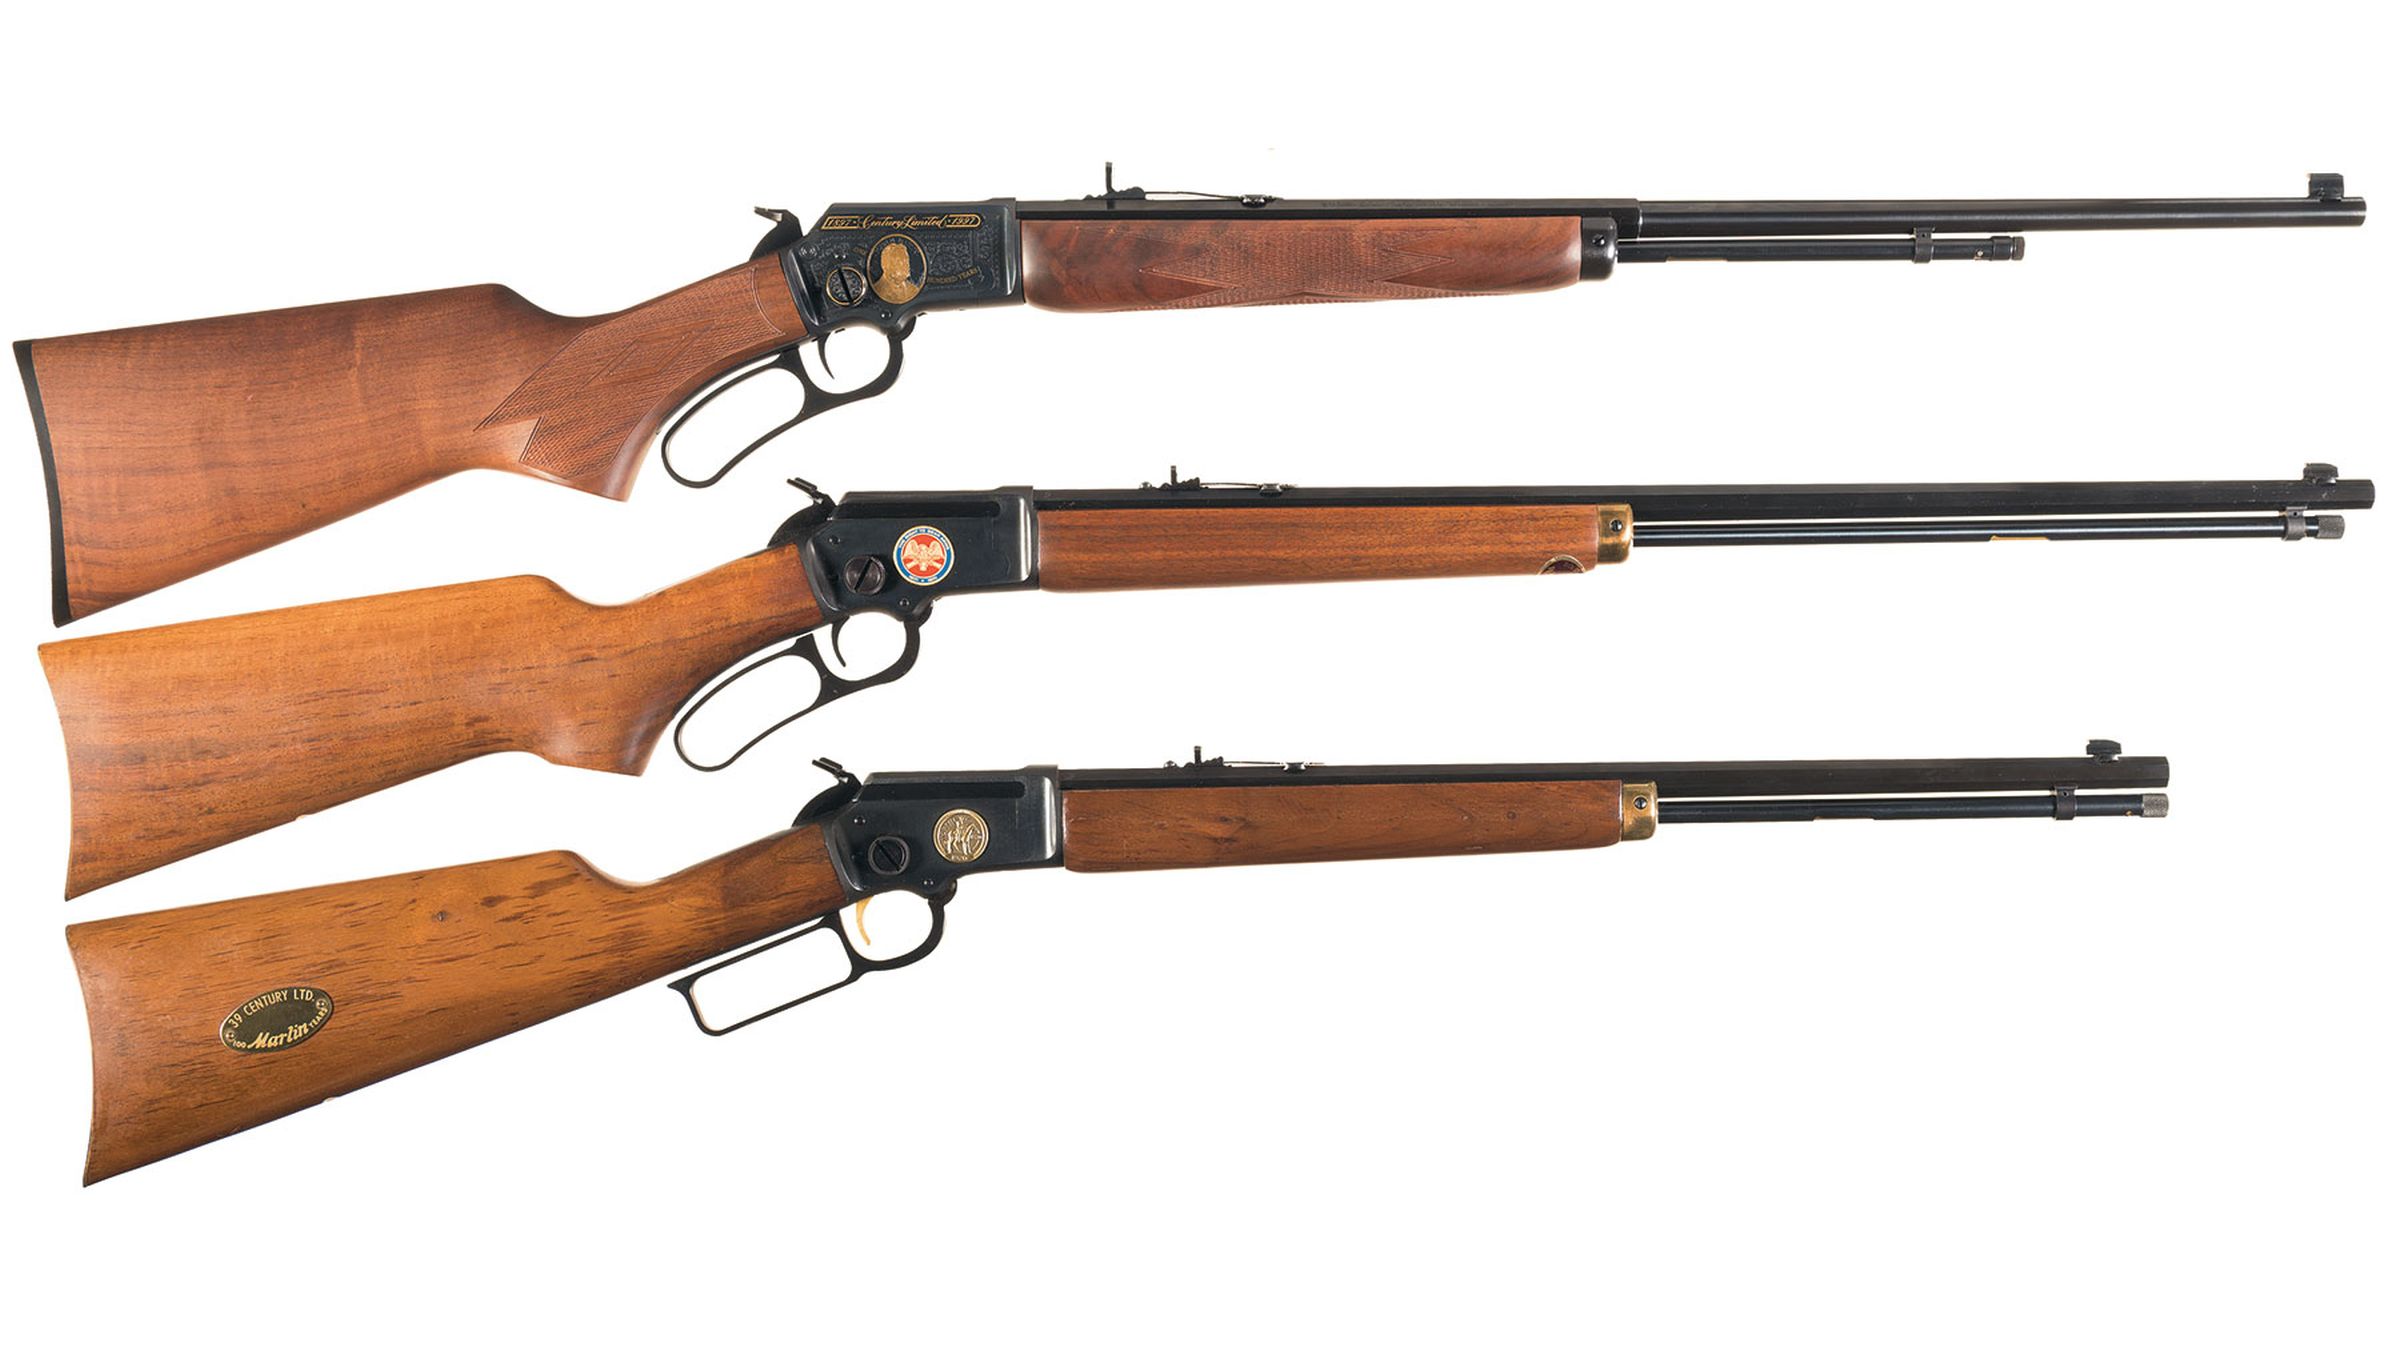 where are the marlin 39 century limited serial numbers